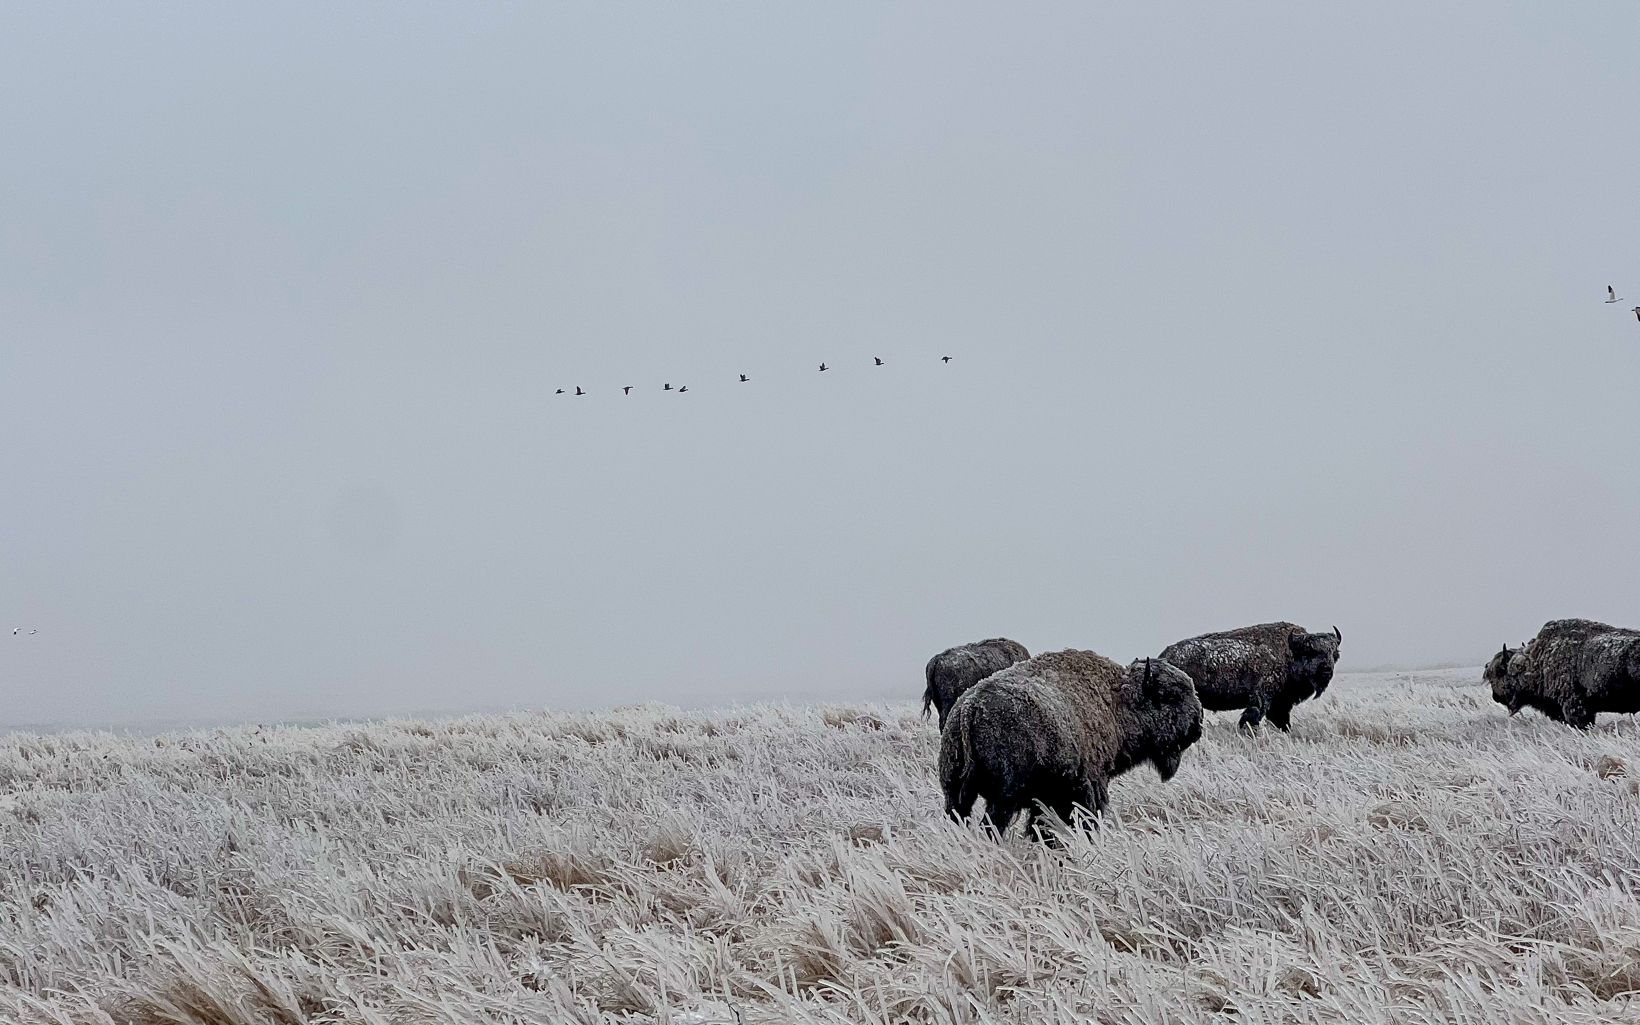 Ordway Prairie Buffalo are a keystone species whose role is integral to thousands of natural relationships across North America.  © Nate Powazki/TNC